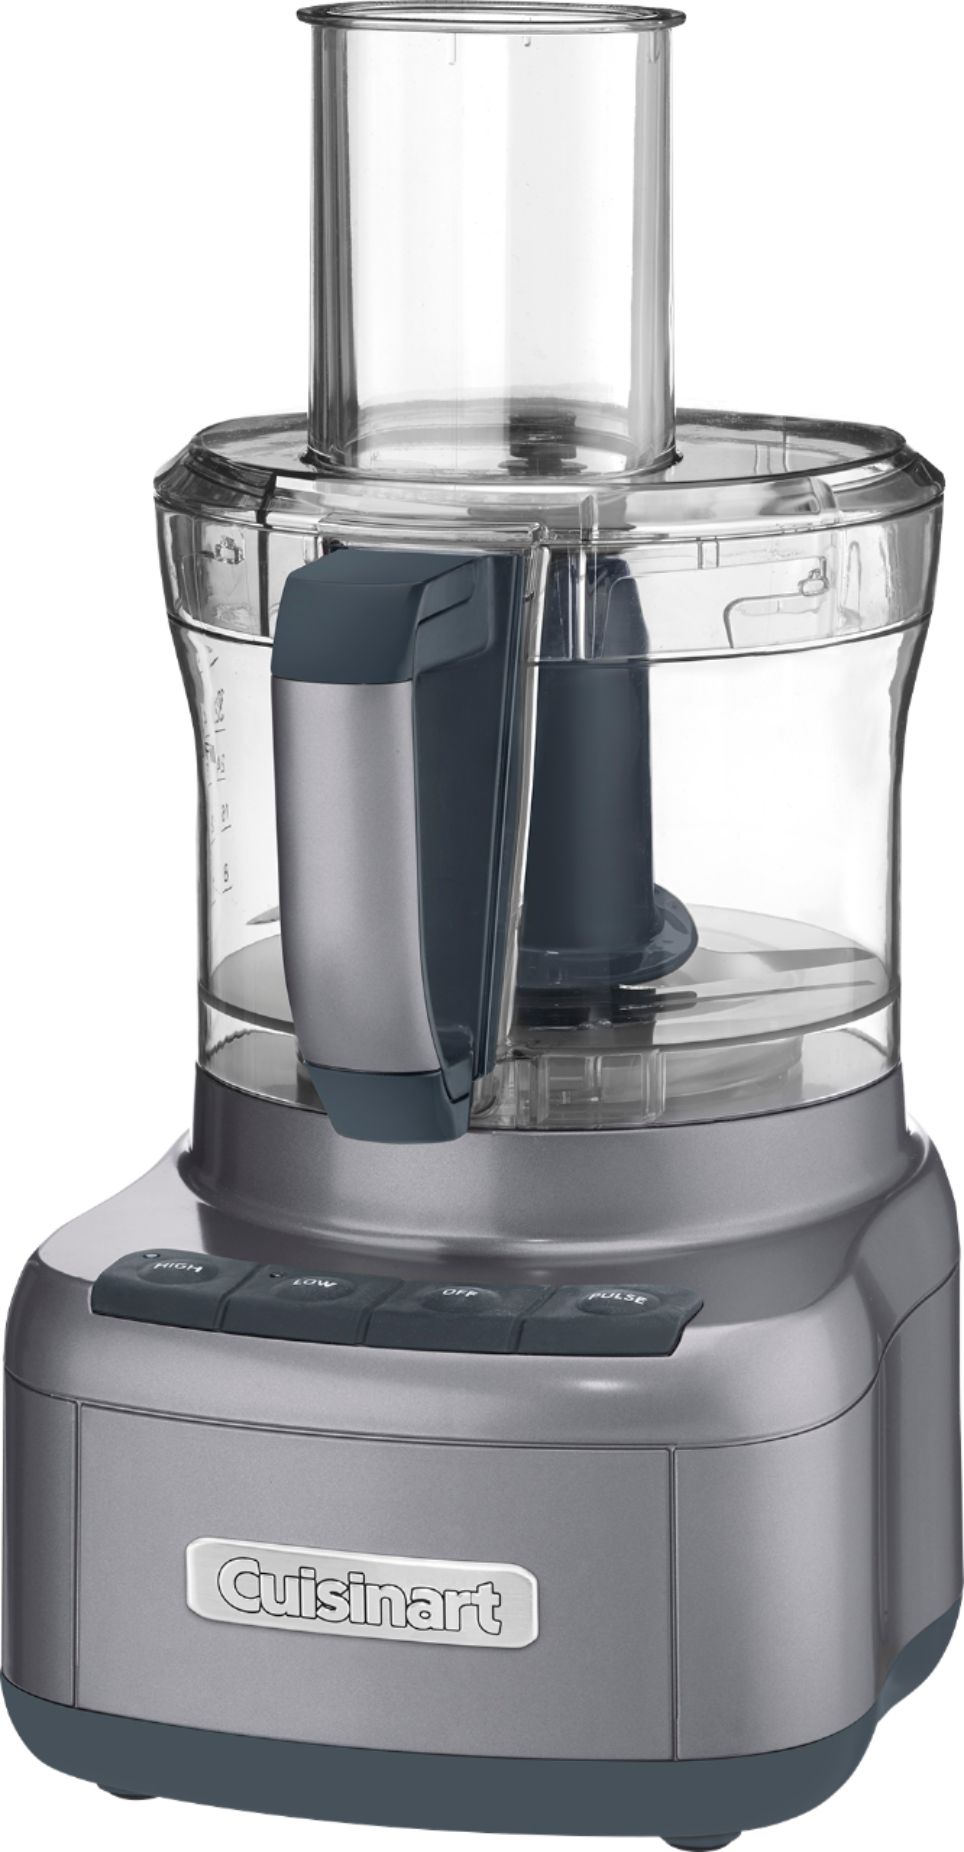 Image of Cuisinart - 8 cup food processor - Silver